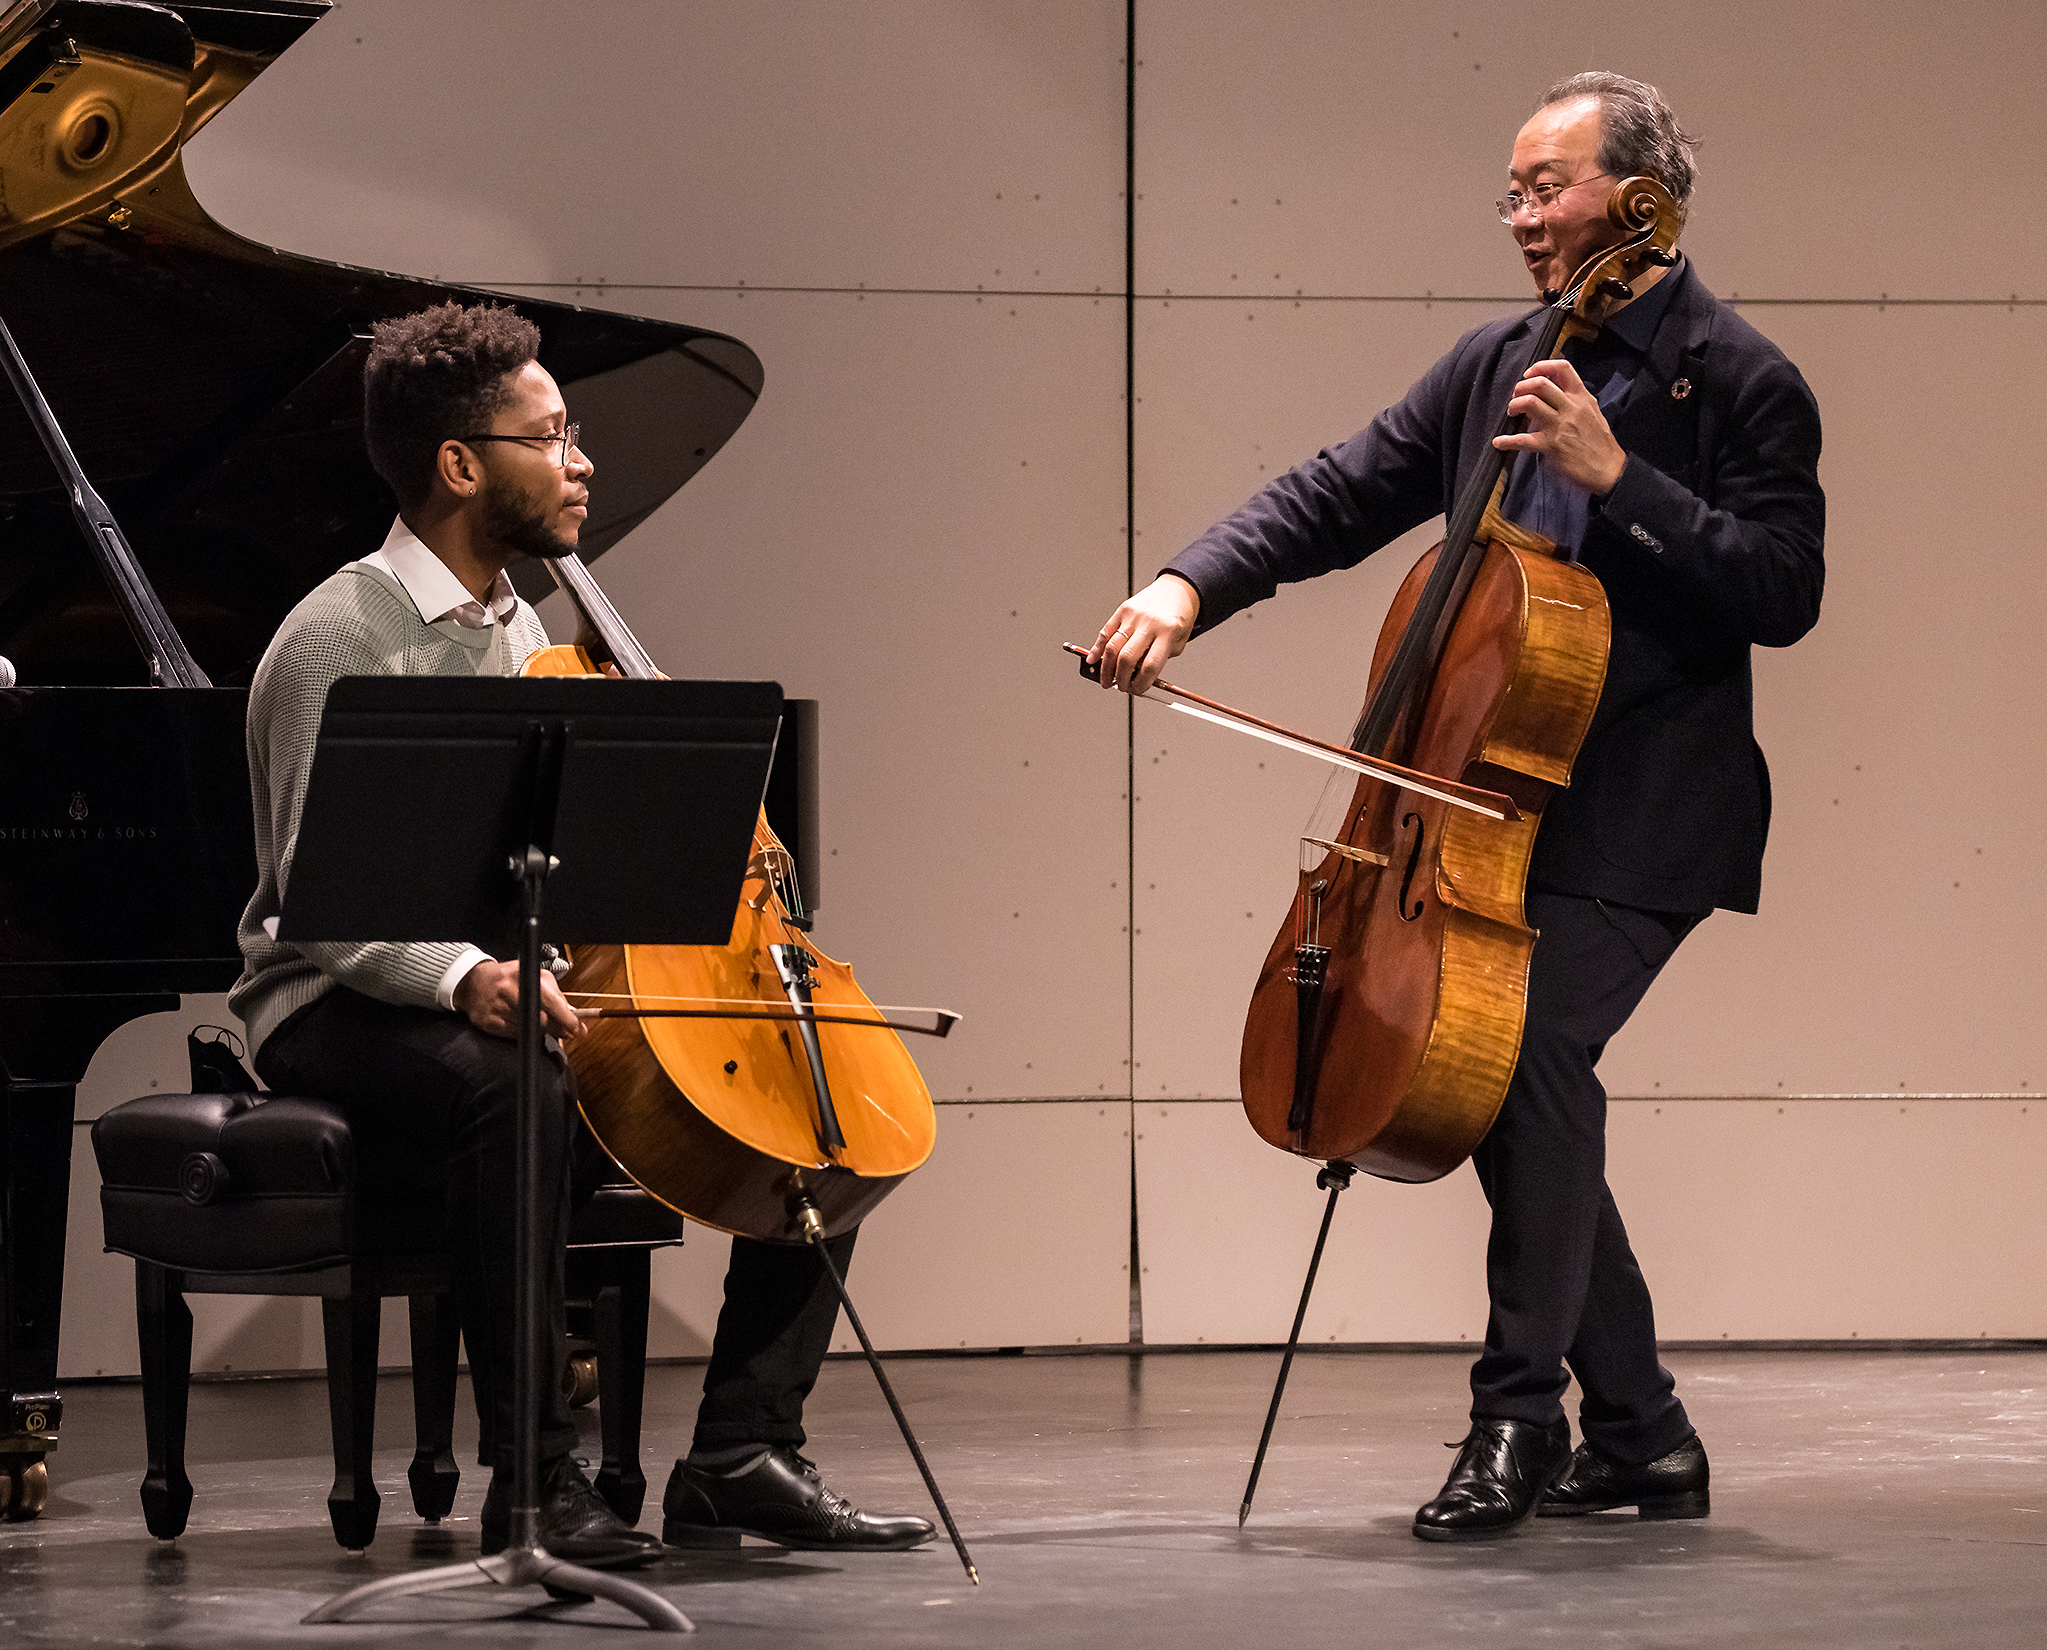 UCSB student Ivan Law taking instruction from Yo-Yo Ma on stage during a masterclass